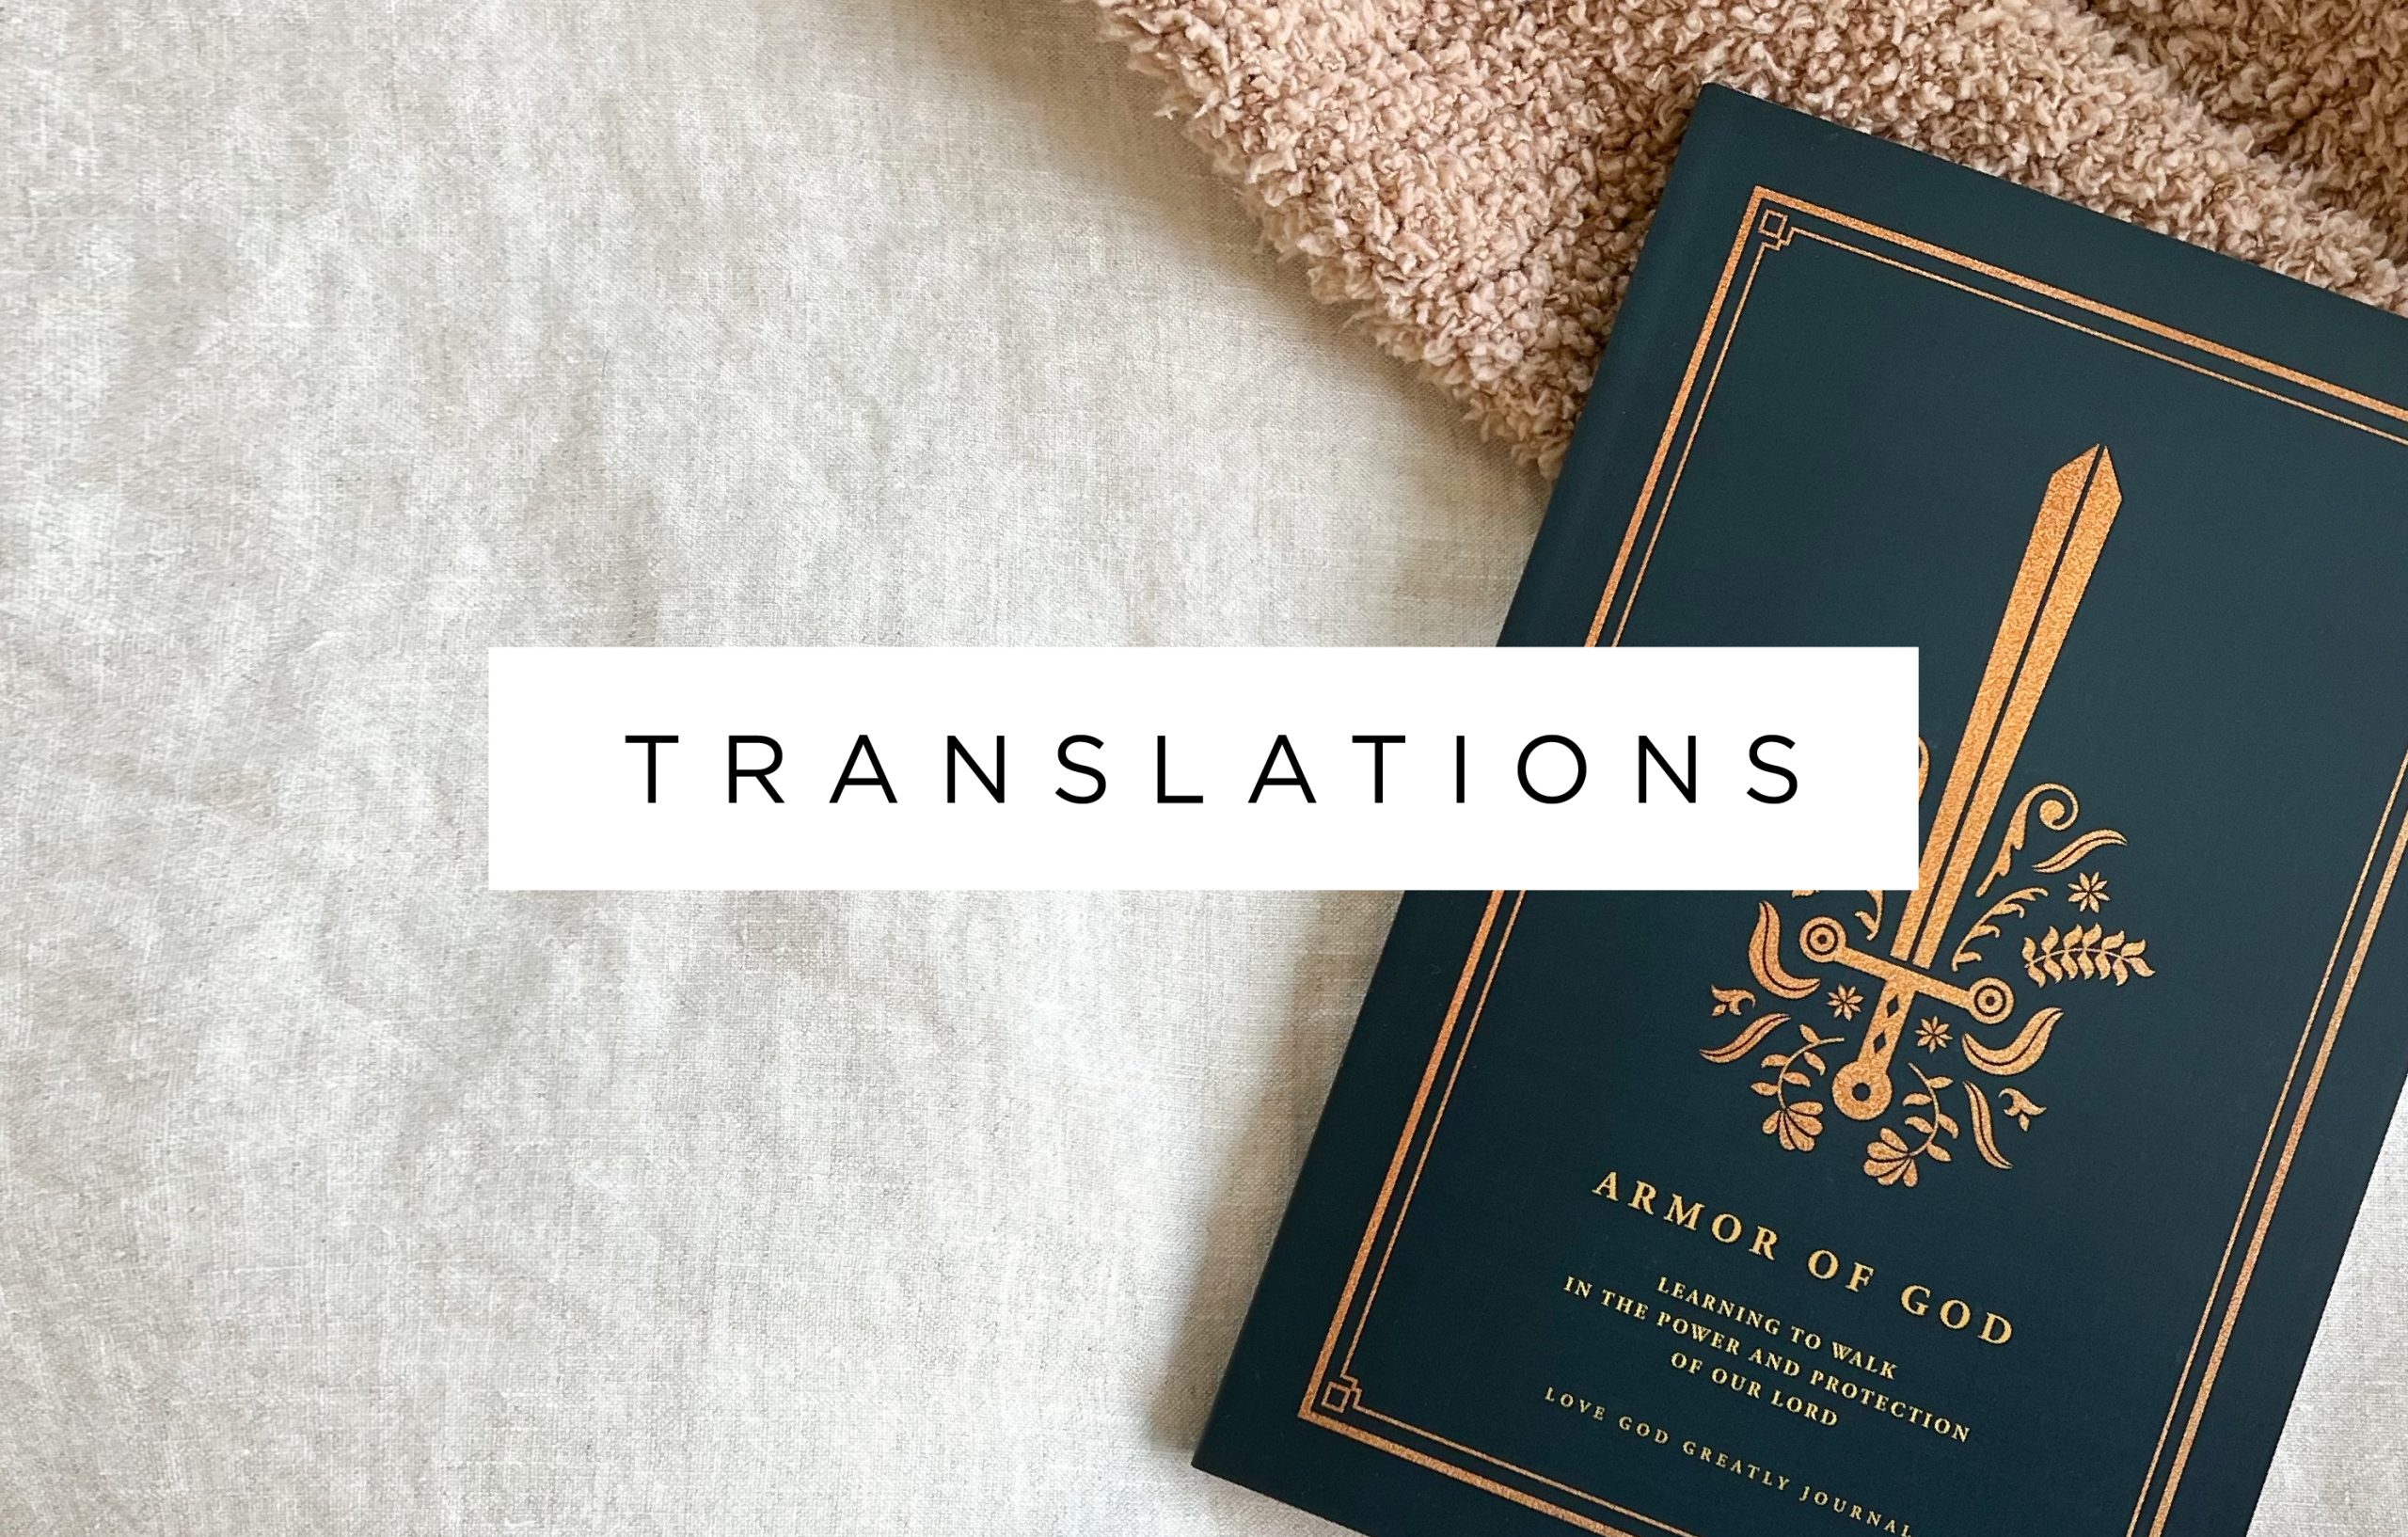 Twenty-two translations of the Armor of God Bible study are now available for free!